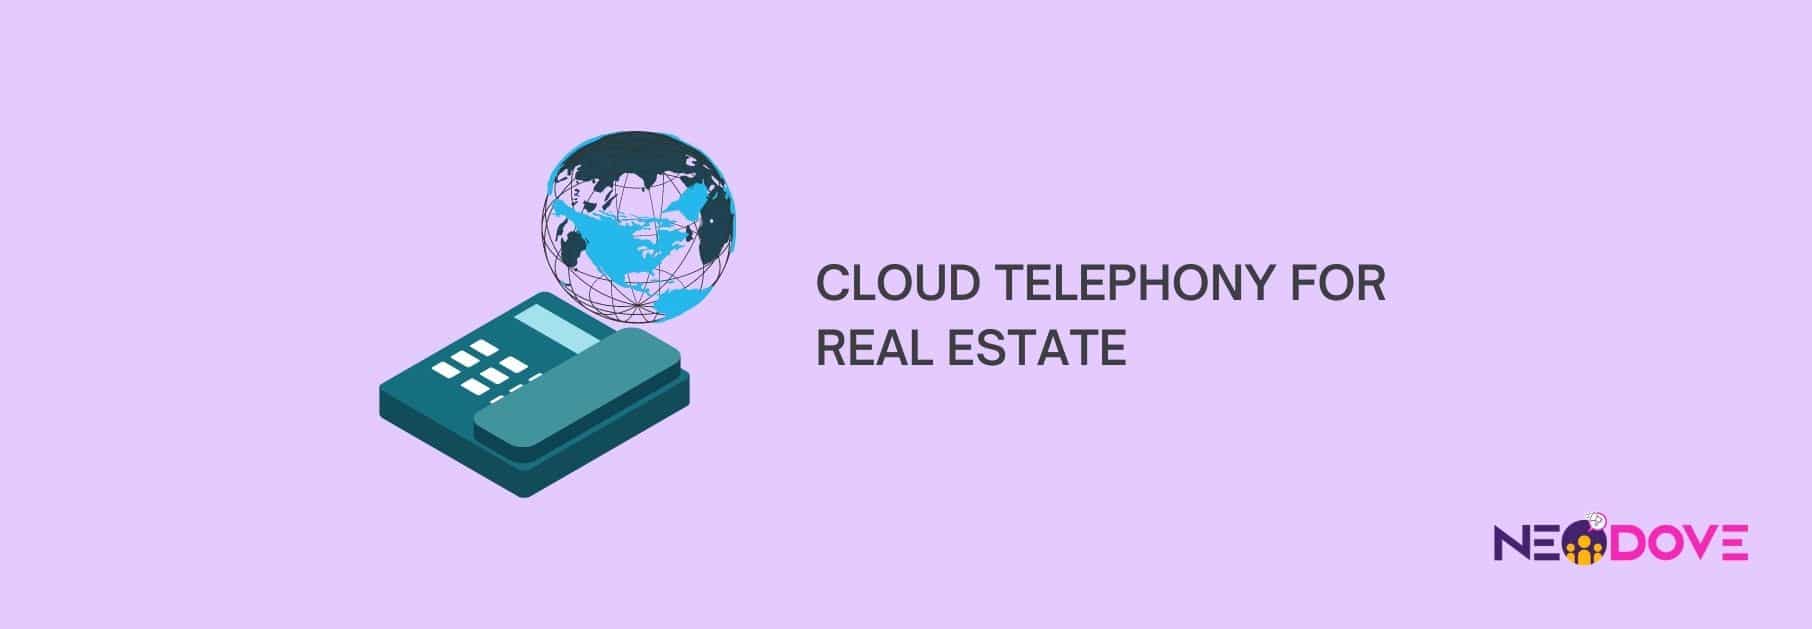 cloud telephony for real estate